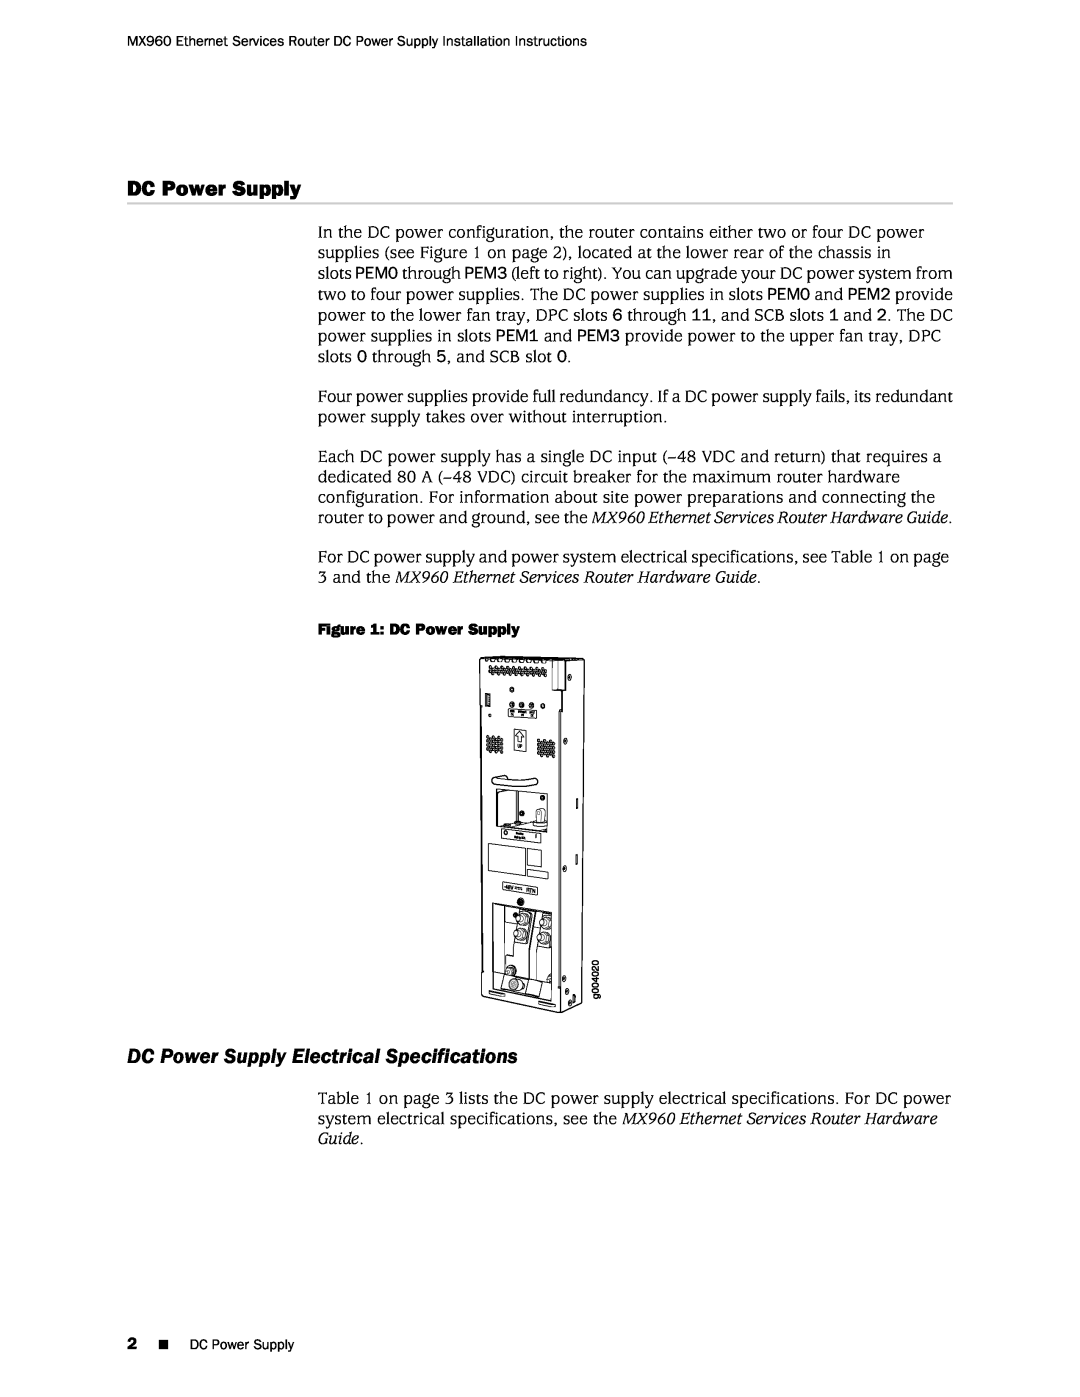 Juniper Networks MX960 installation instructions DC Power Supply Electrical Specifications 